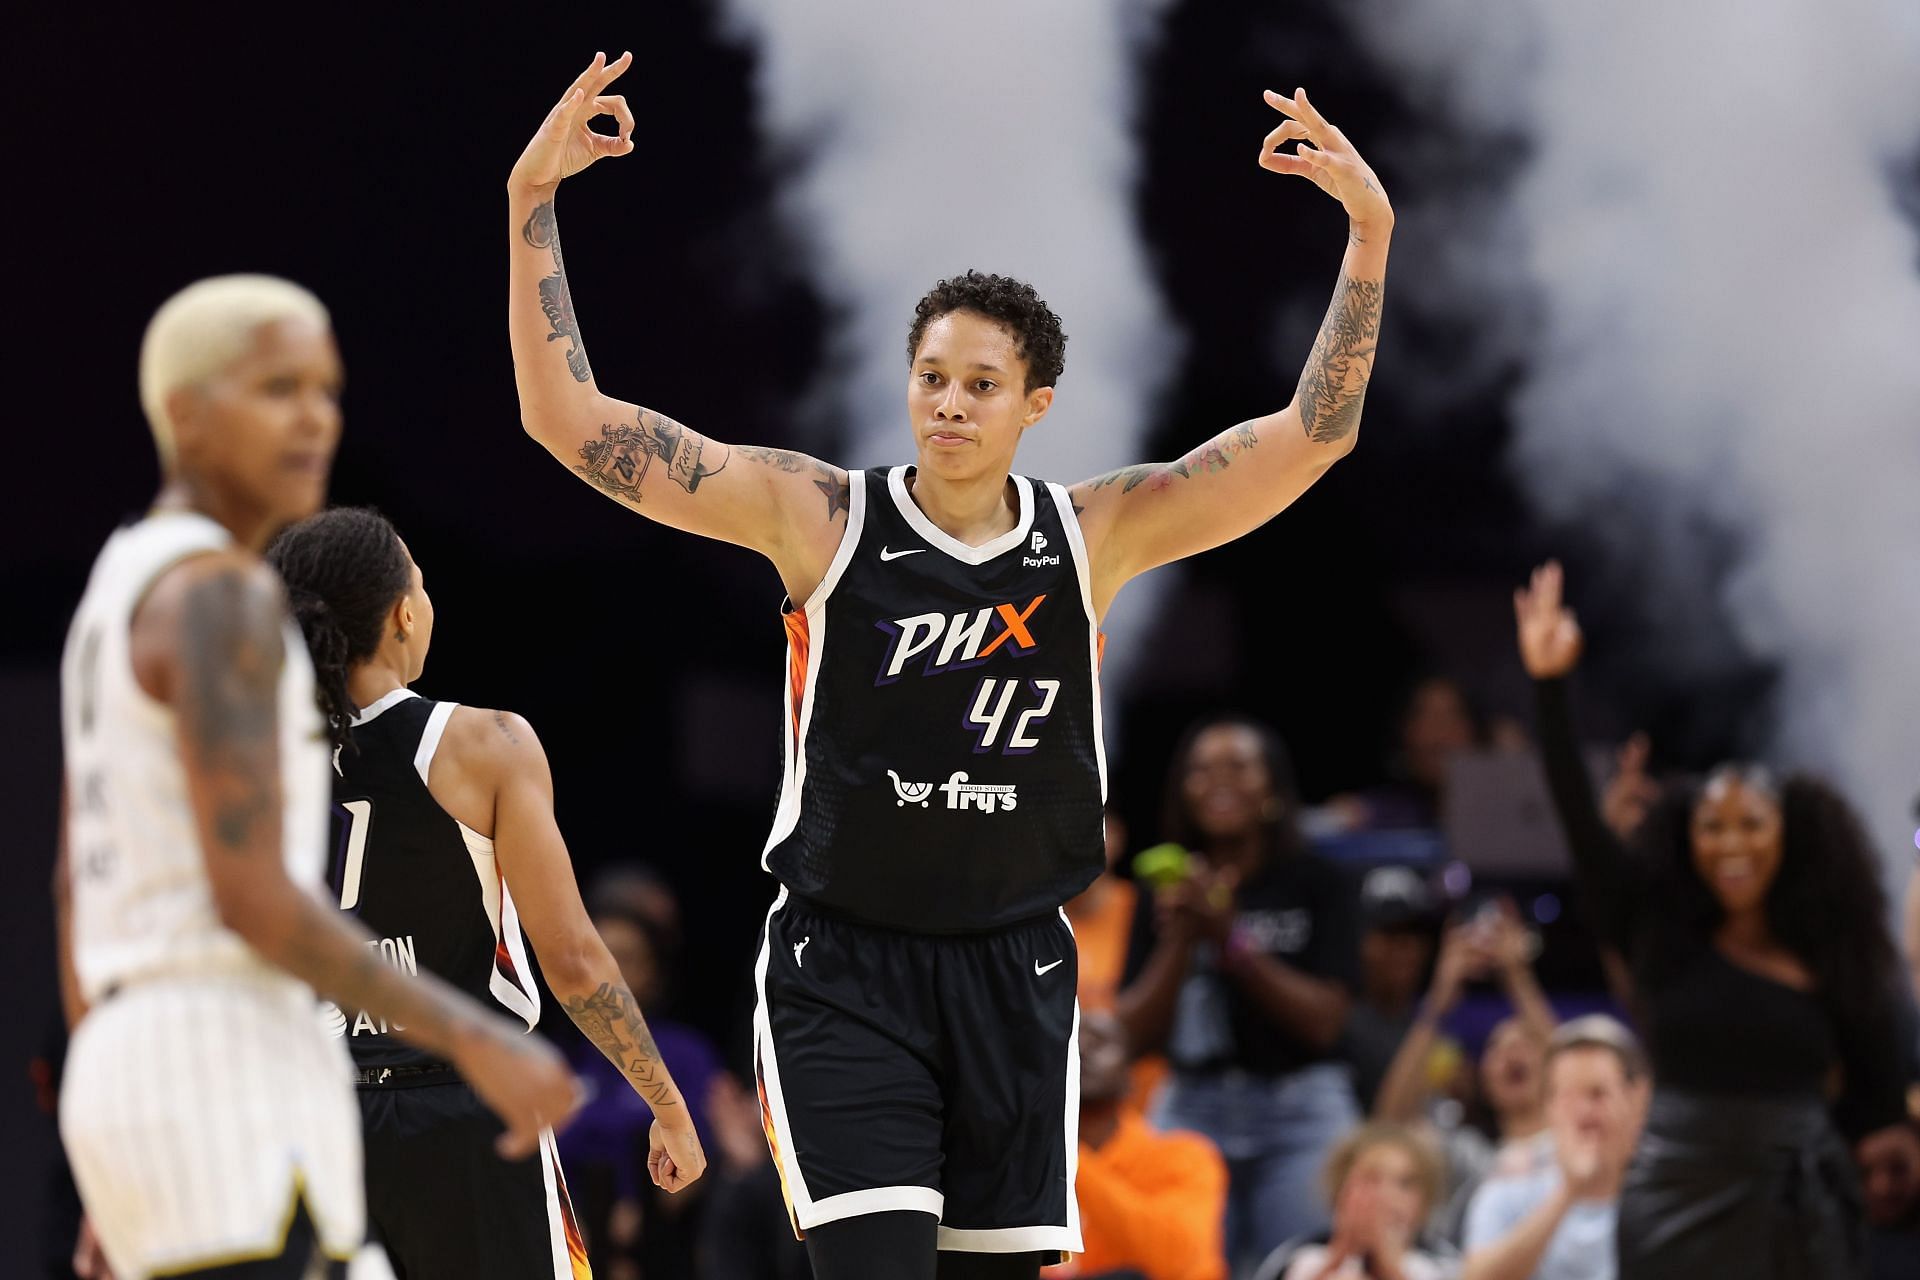 Griner signed a short-term contract with the Mercury (Image via Getty Images)